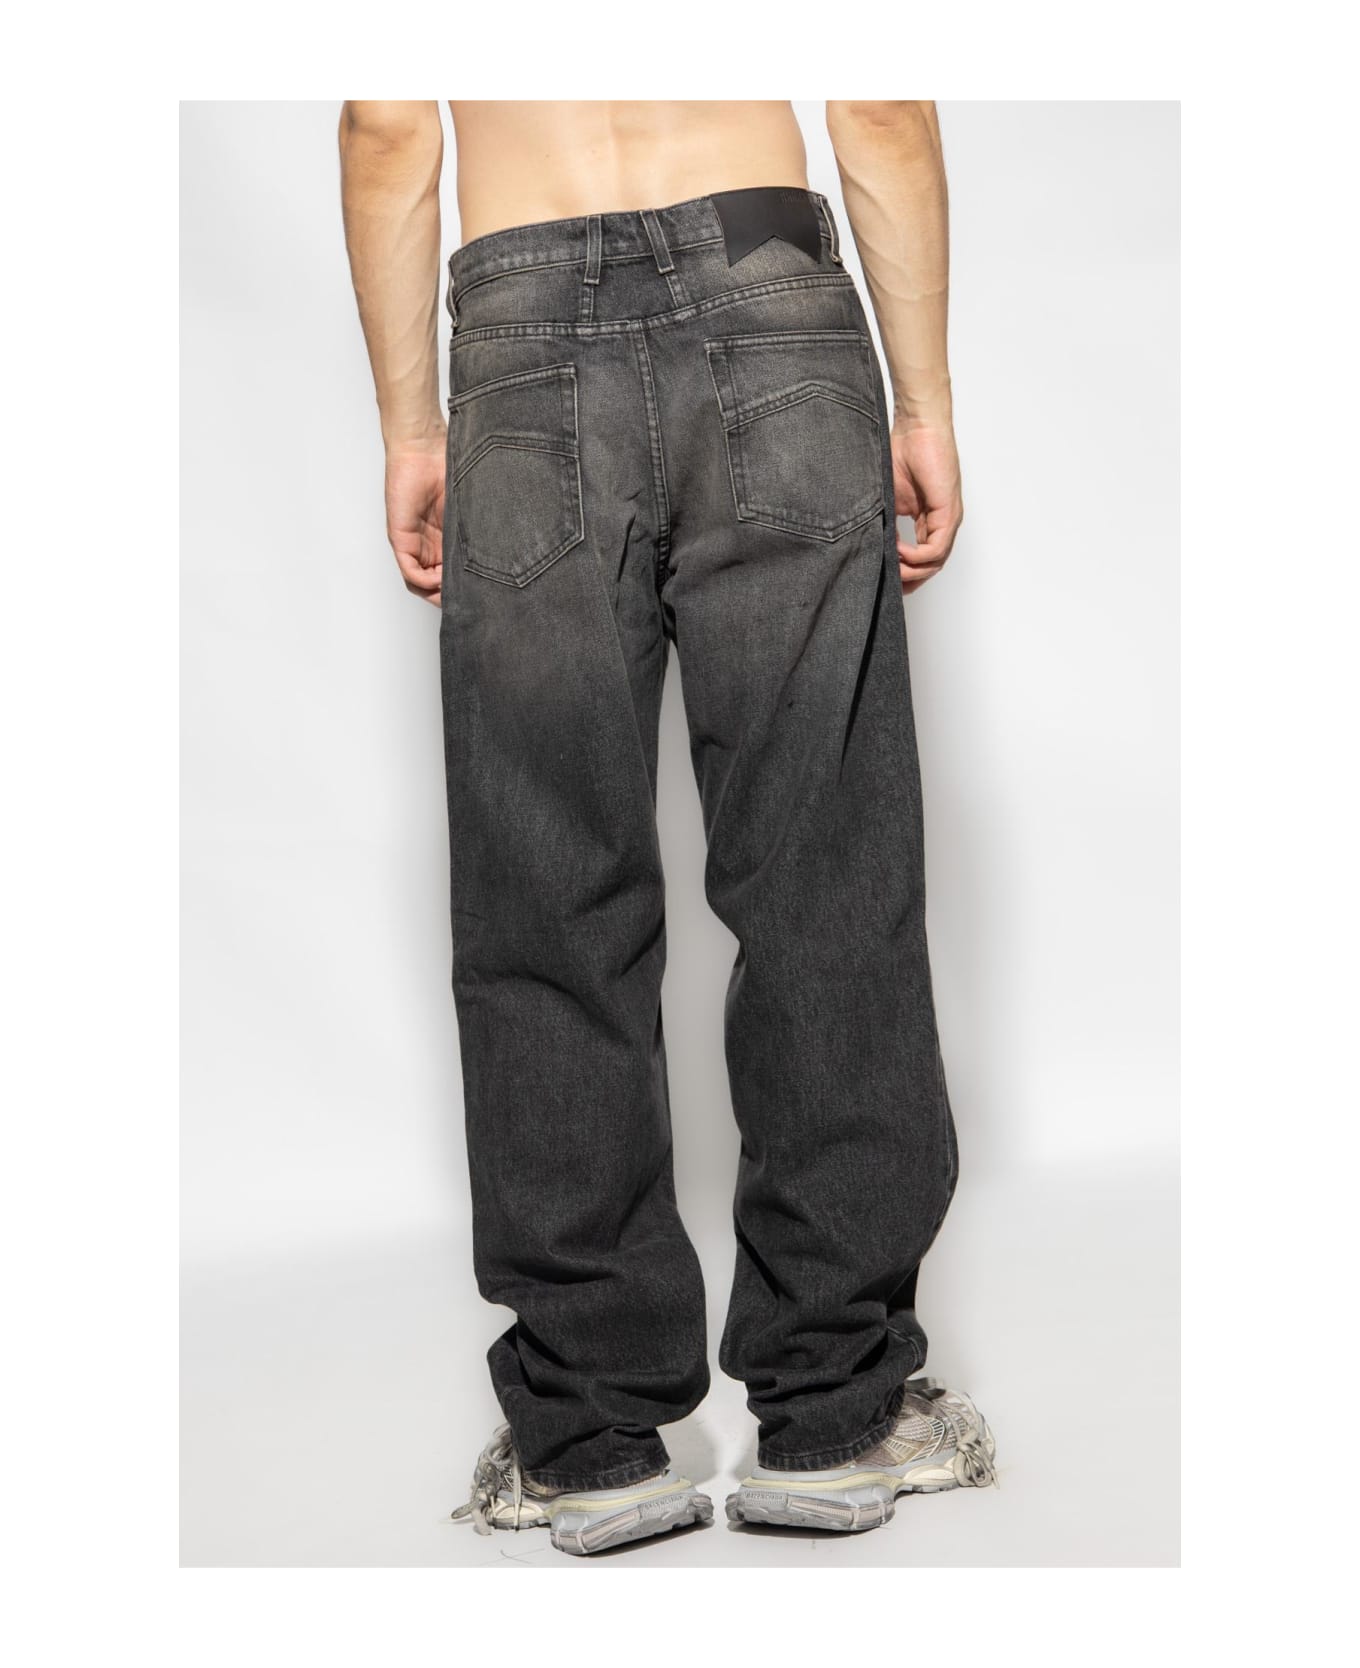 Rhude Jeans With Straight Legs - Black